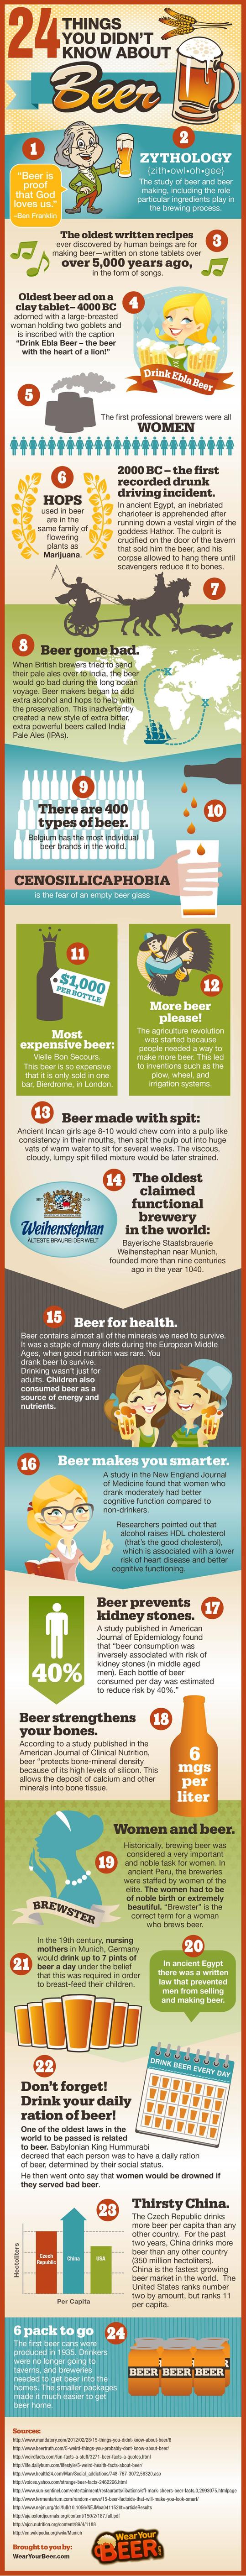 24-things-about-beer